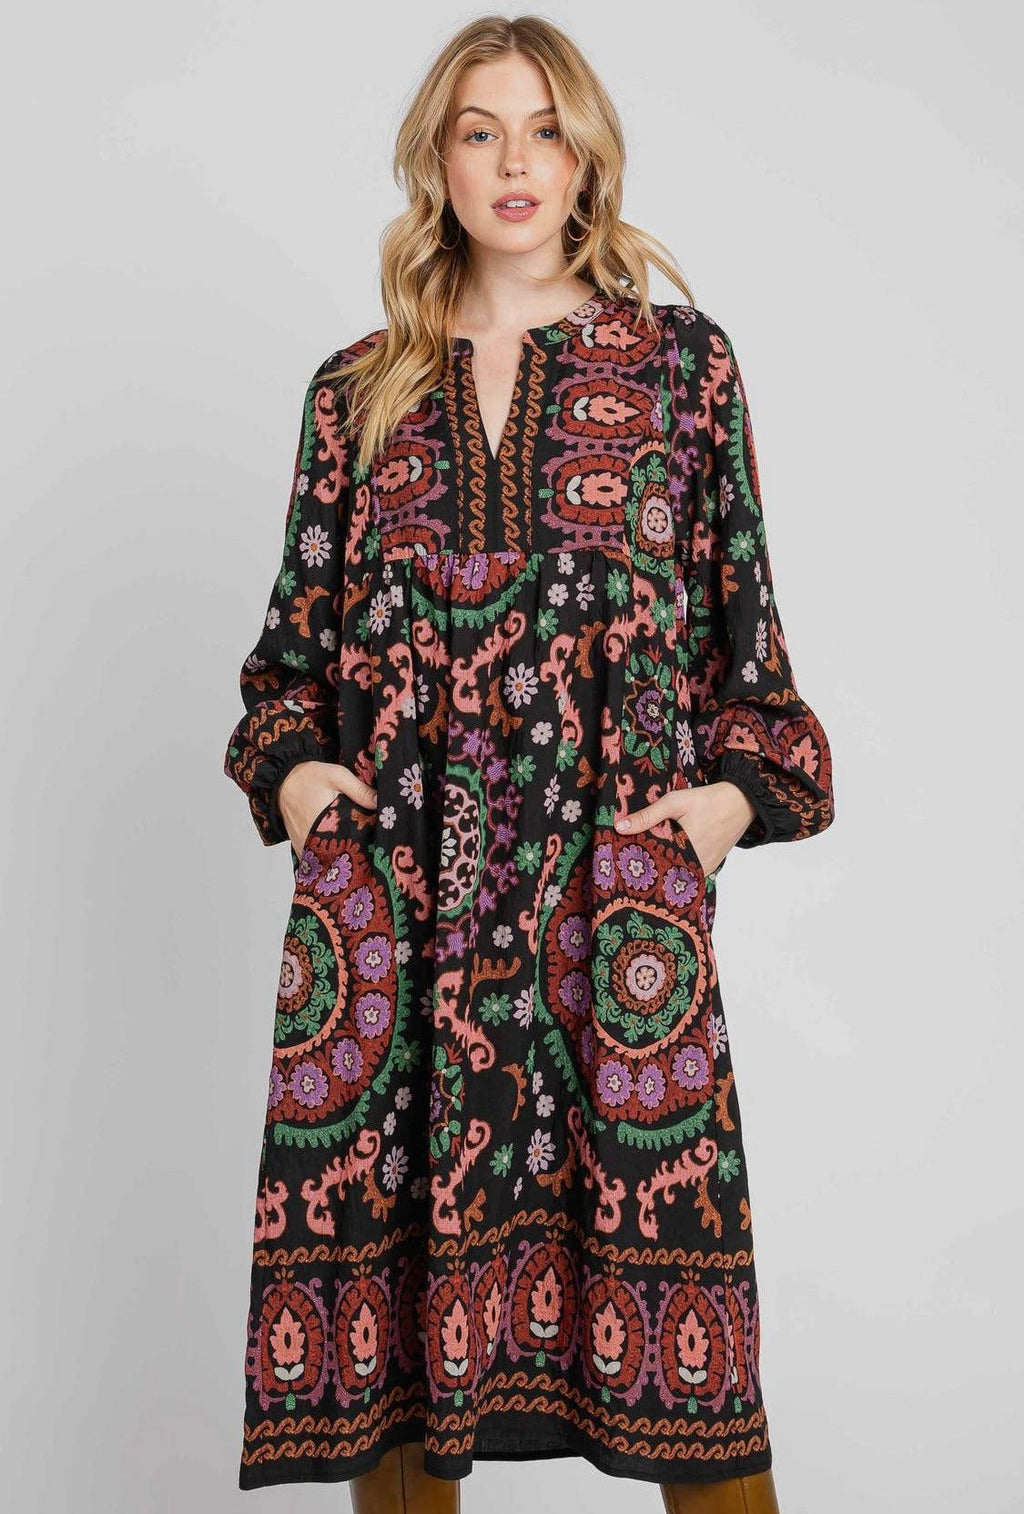 Mandala Patterned Midi Dress-150 Dresses-Fall Fave Patterned Dress, Mandala Print Dress, Max Retail, Patterned Dress-Medium-[option4]-[option5]-[option6]-Womens-USA-Clothing-Boutique-Shop-Online-Clothes Minded